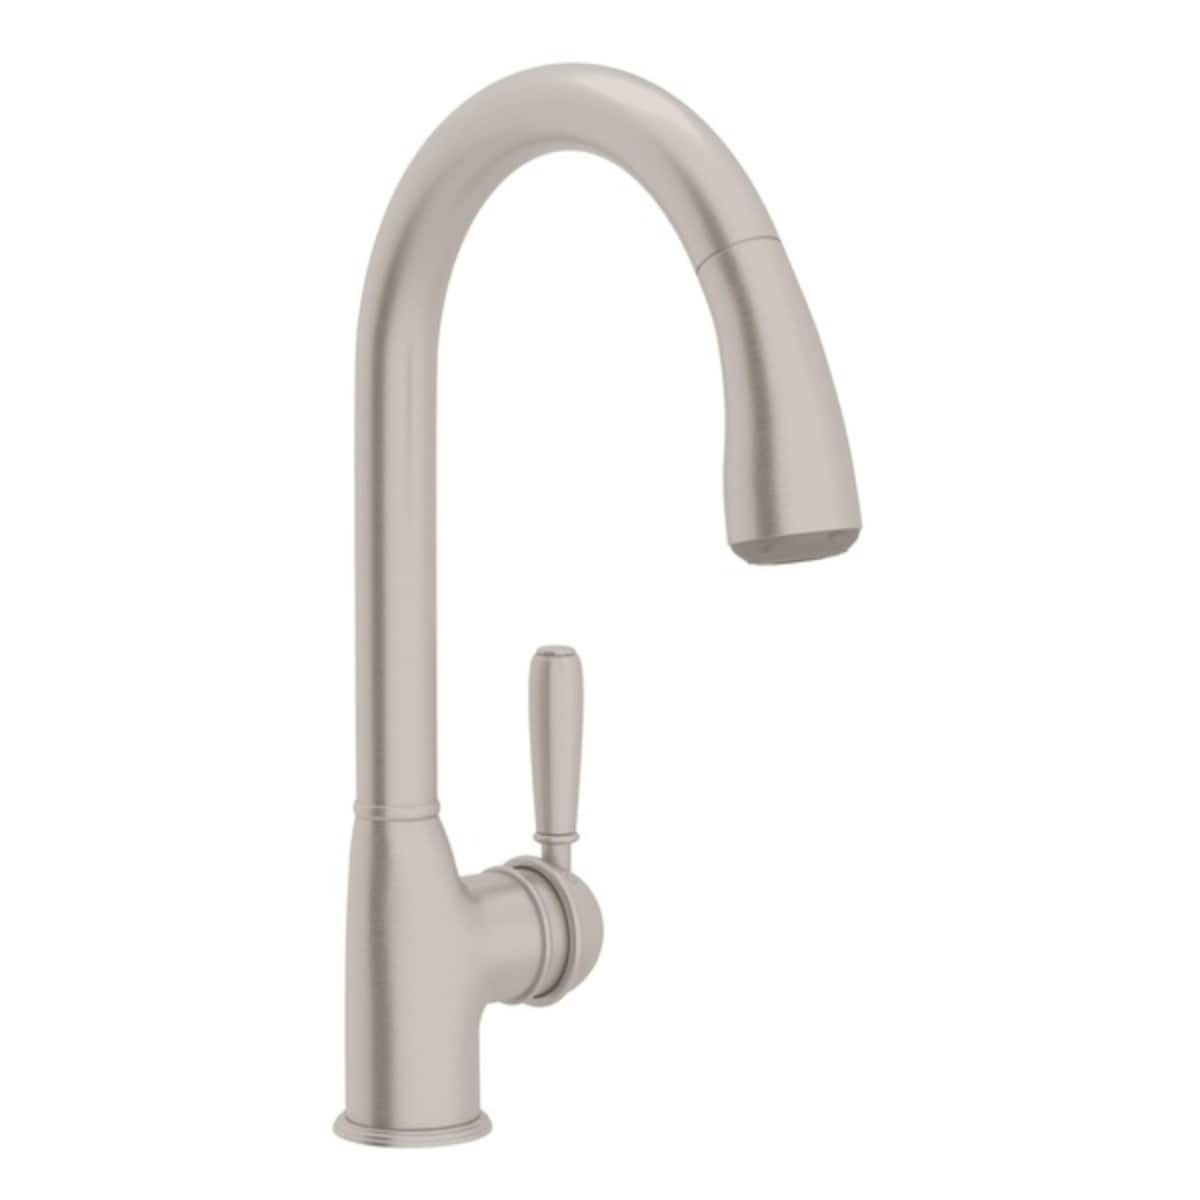 Shop Black Friday Deals On Rohl R7504 1983 Pull Down Kitchen Faucet Overstock 24079633